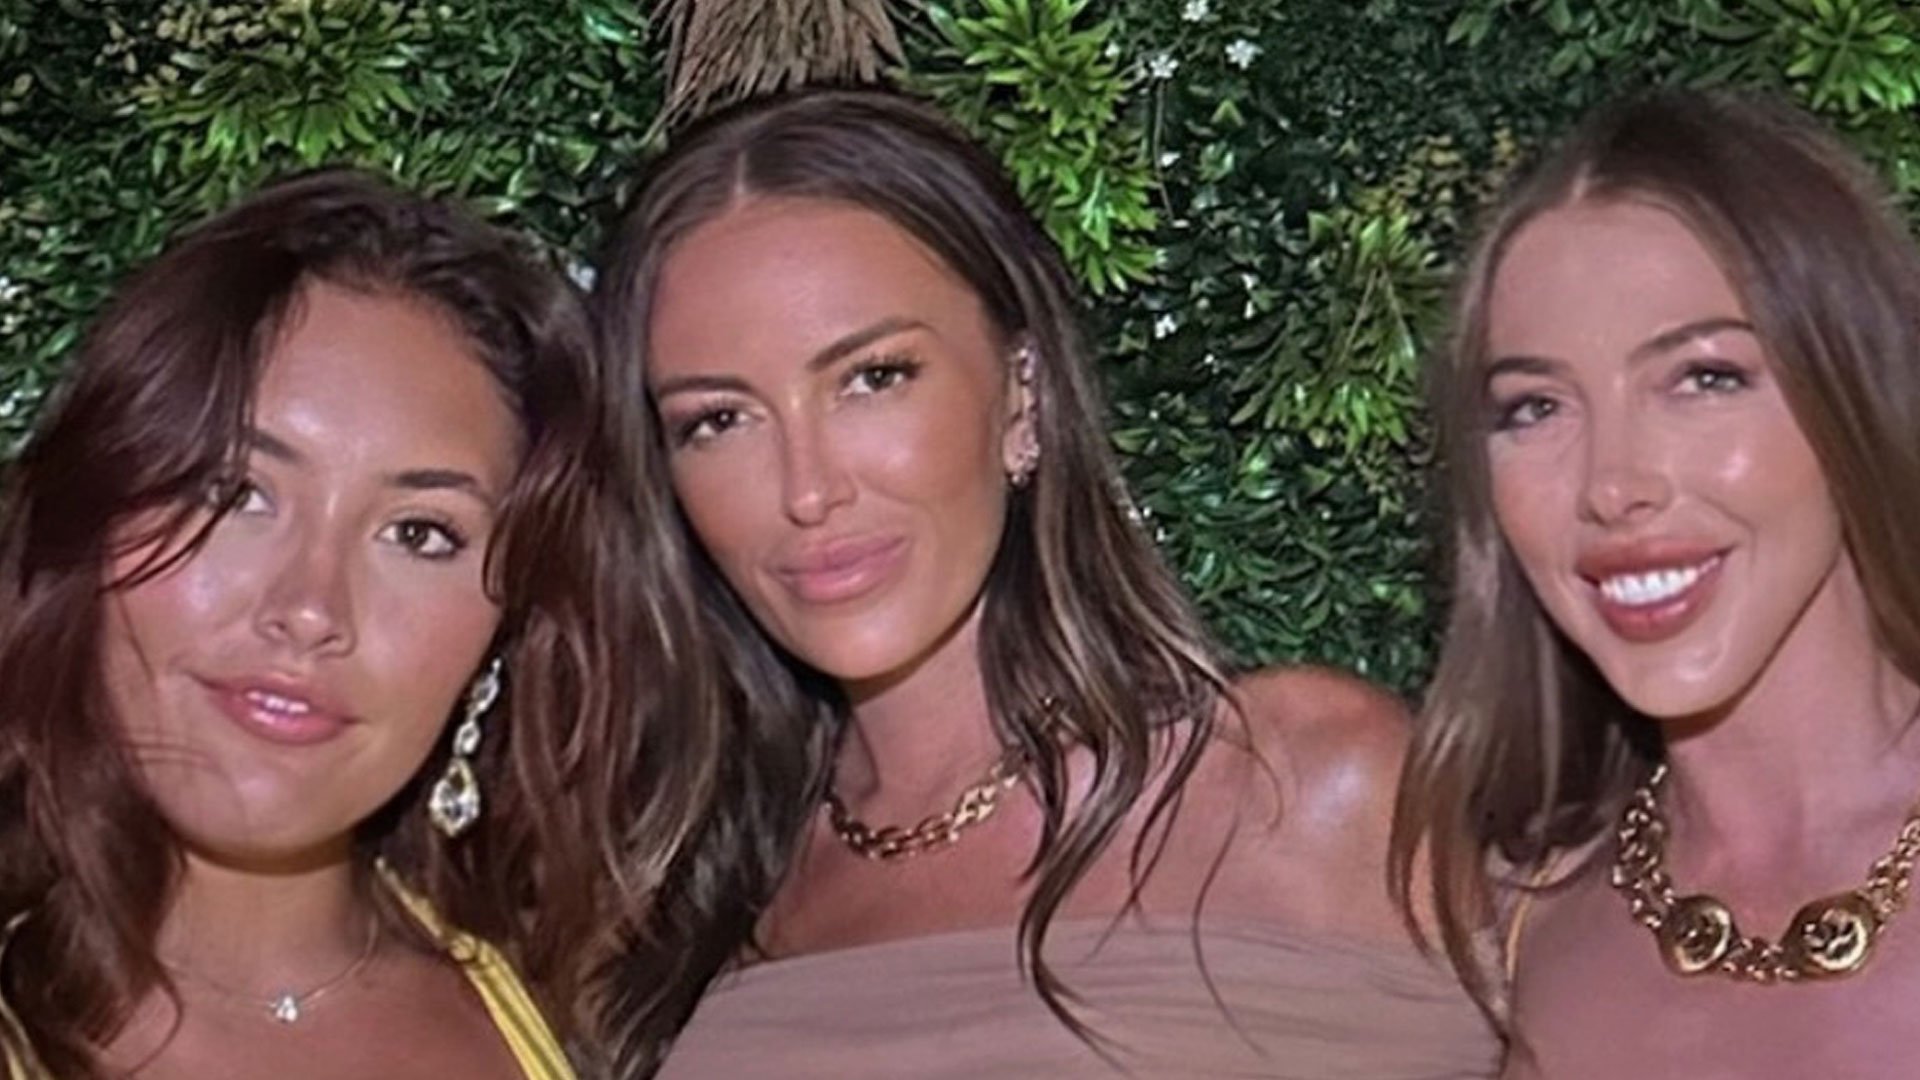 Paulina Gretzky in wardrobe malfunction as almost invisible dress leaves little to the imagination for fans of golf Wag